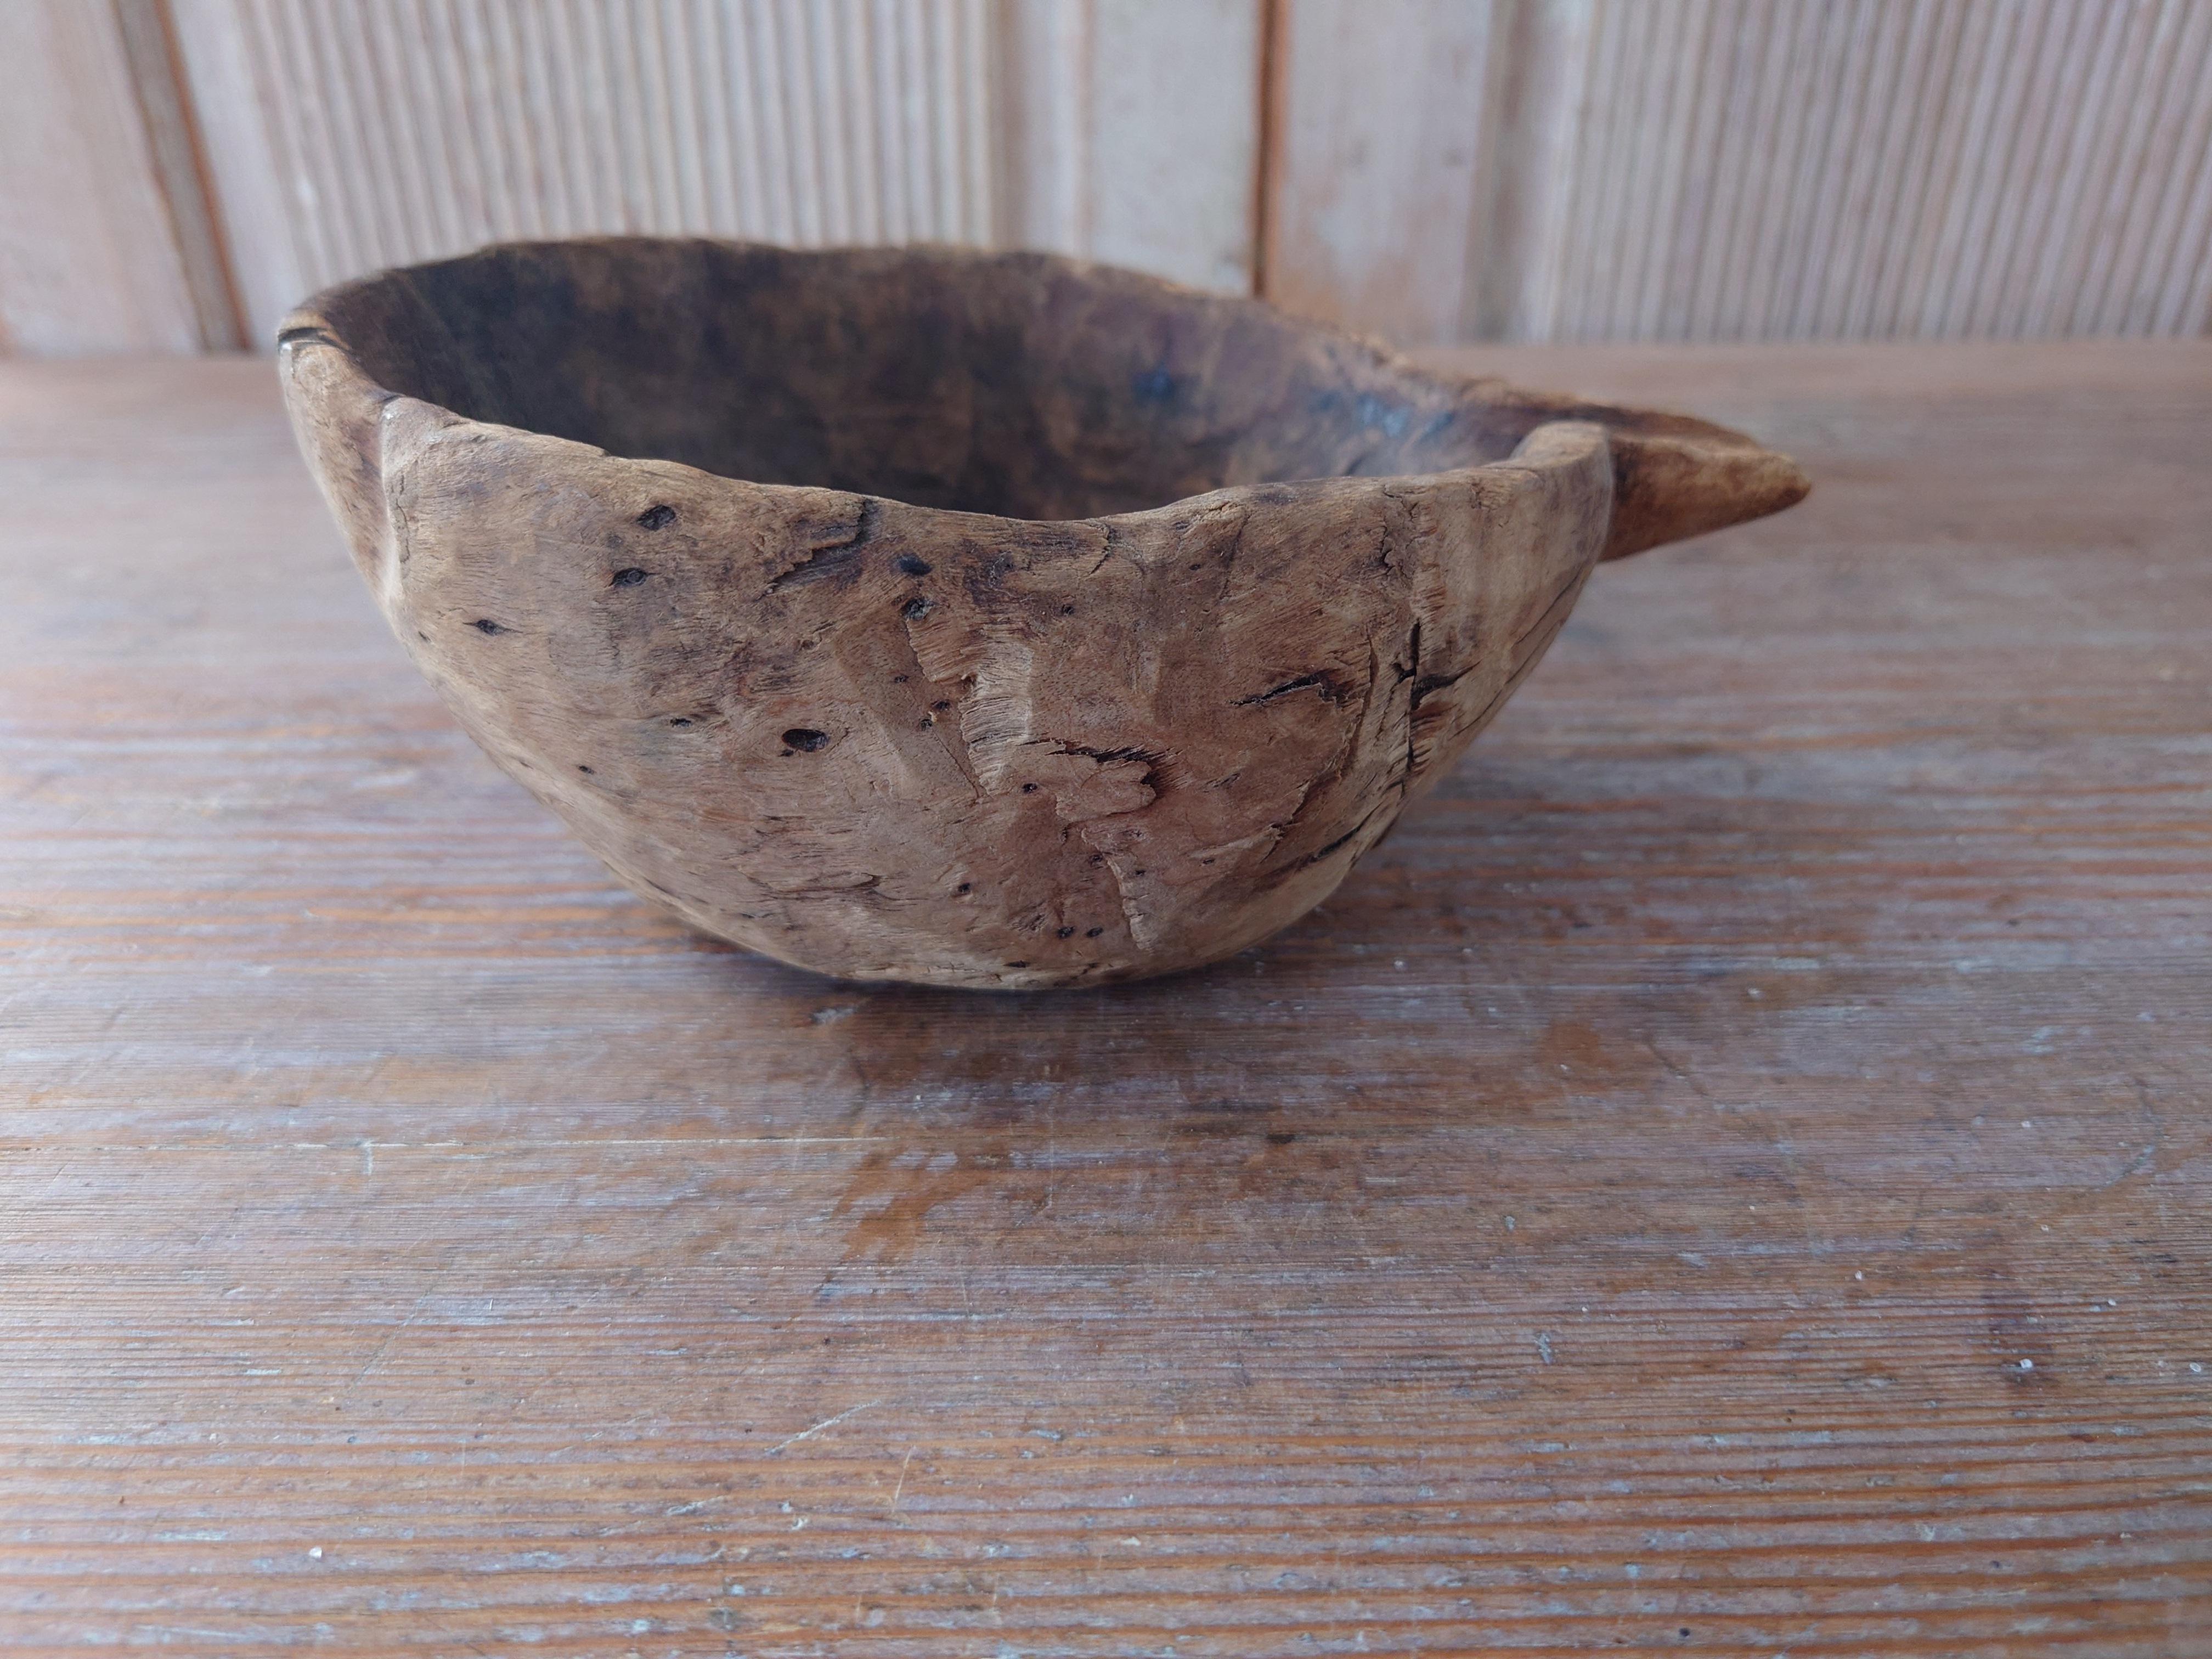 19th century Swedish antique handmade wood bowl with handle from the first half of the 19th century. The bowl with handle from northern Sweden is in Swedish called 